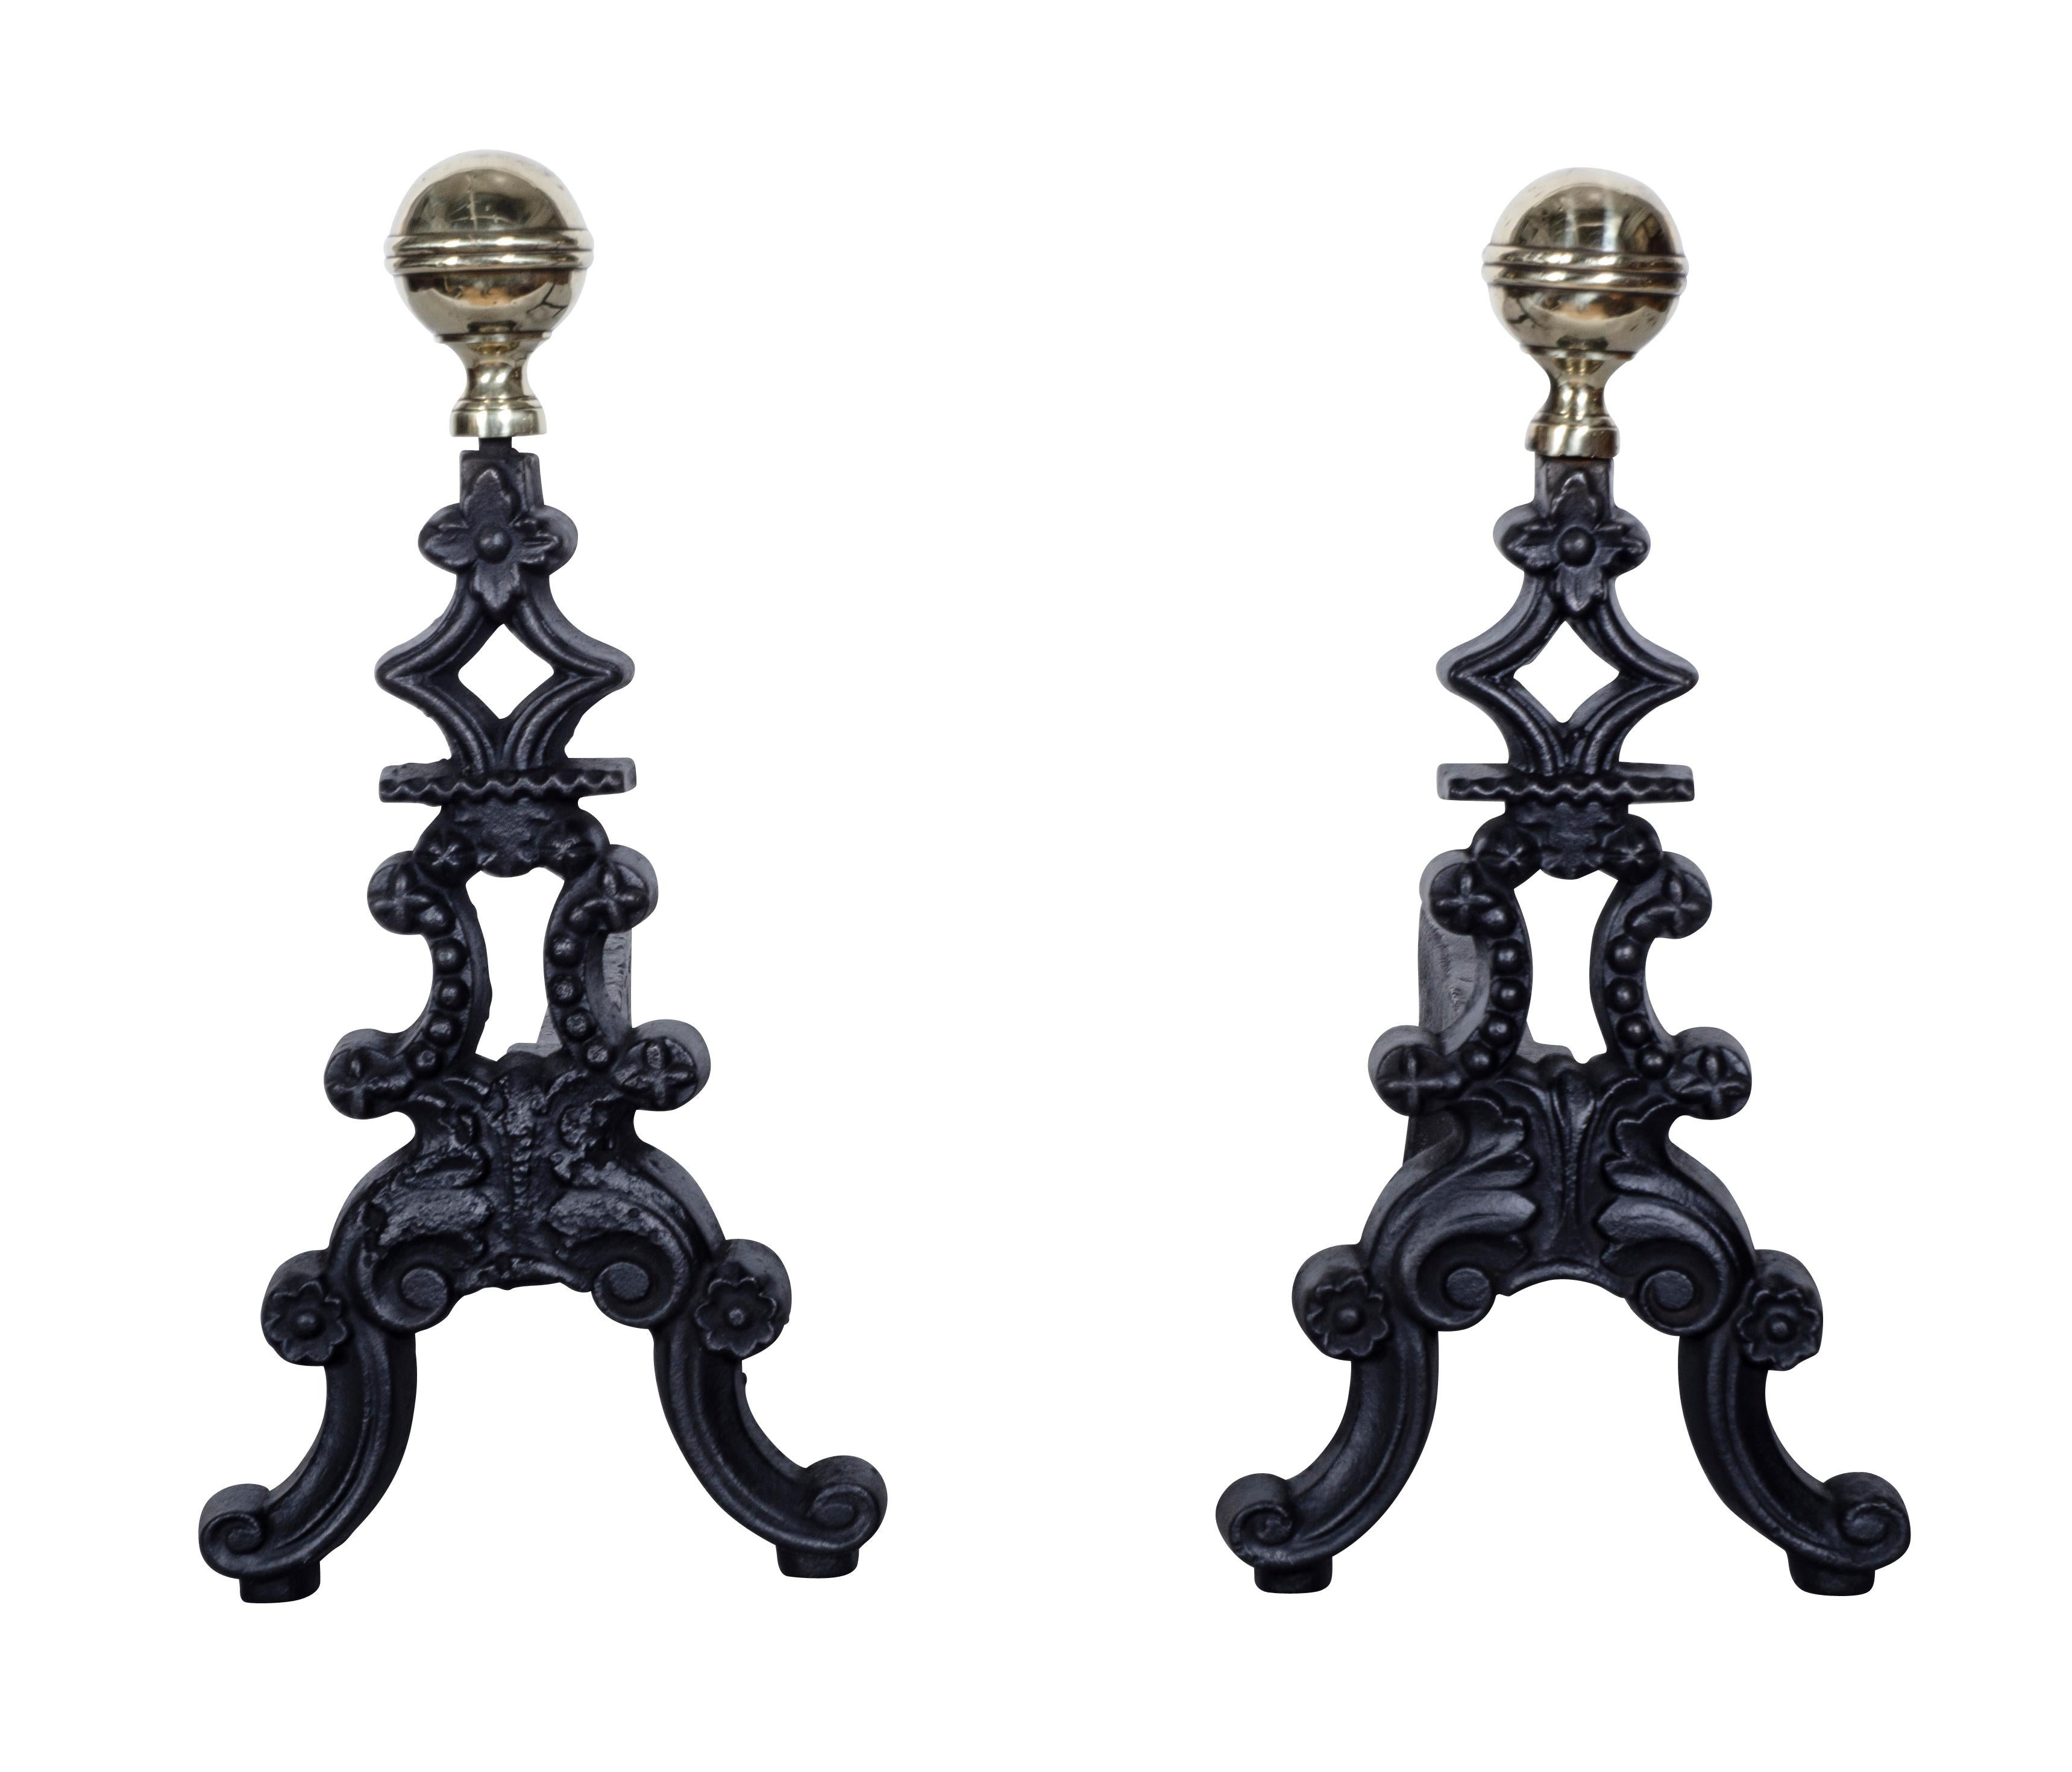 These were made for city small fireplaces. Brass finials cast iron legs. Polished and painted.